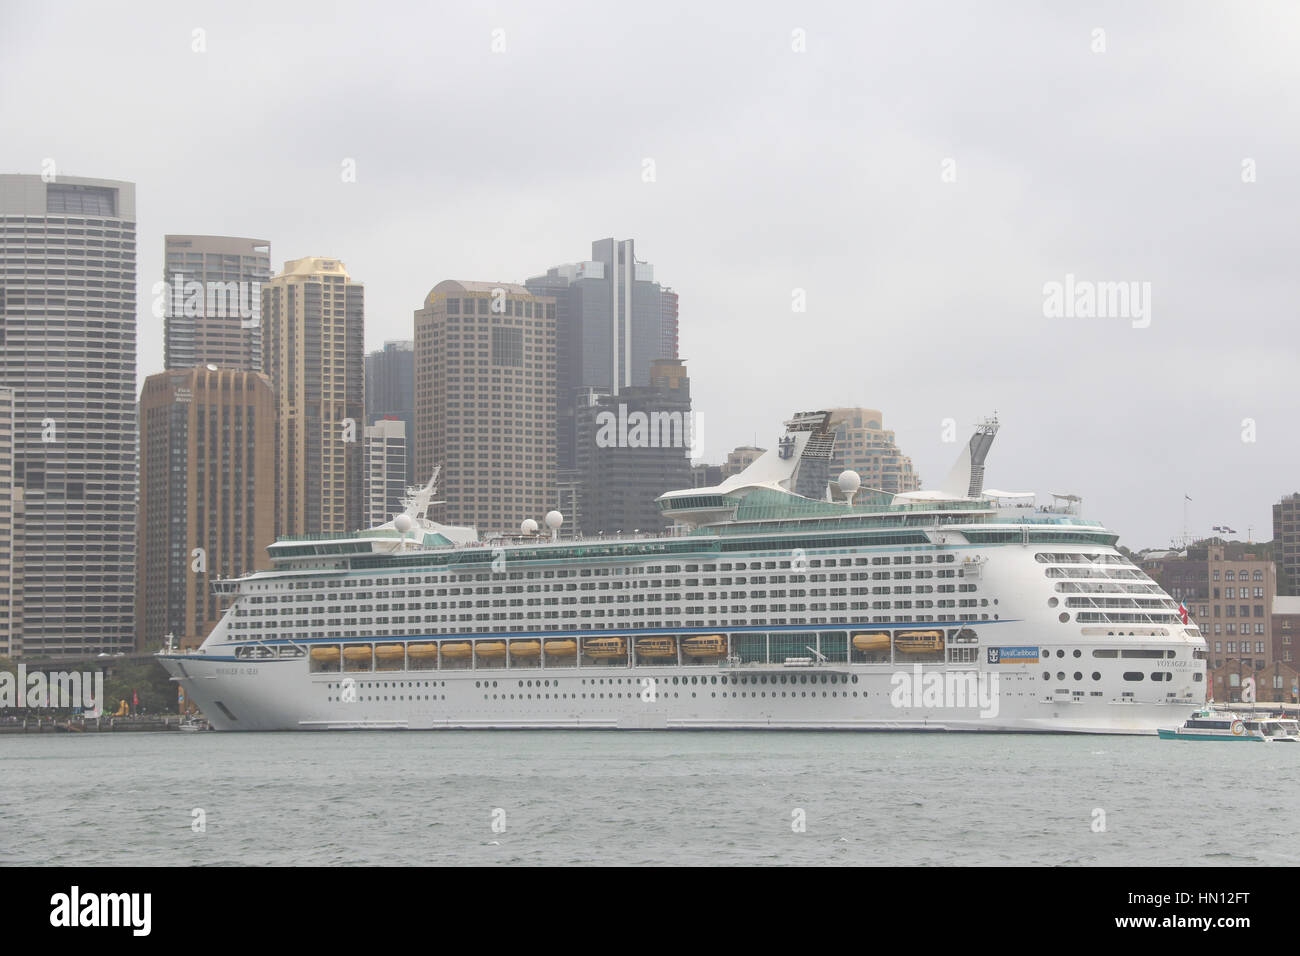 The Royal Caribbean International MS Voyager of the Seas ship docked at the Overseas Passenger Terminal, The Rocks in Sydney, Australia. Stock Photo